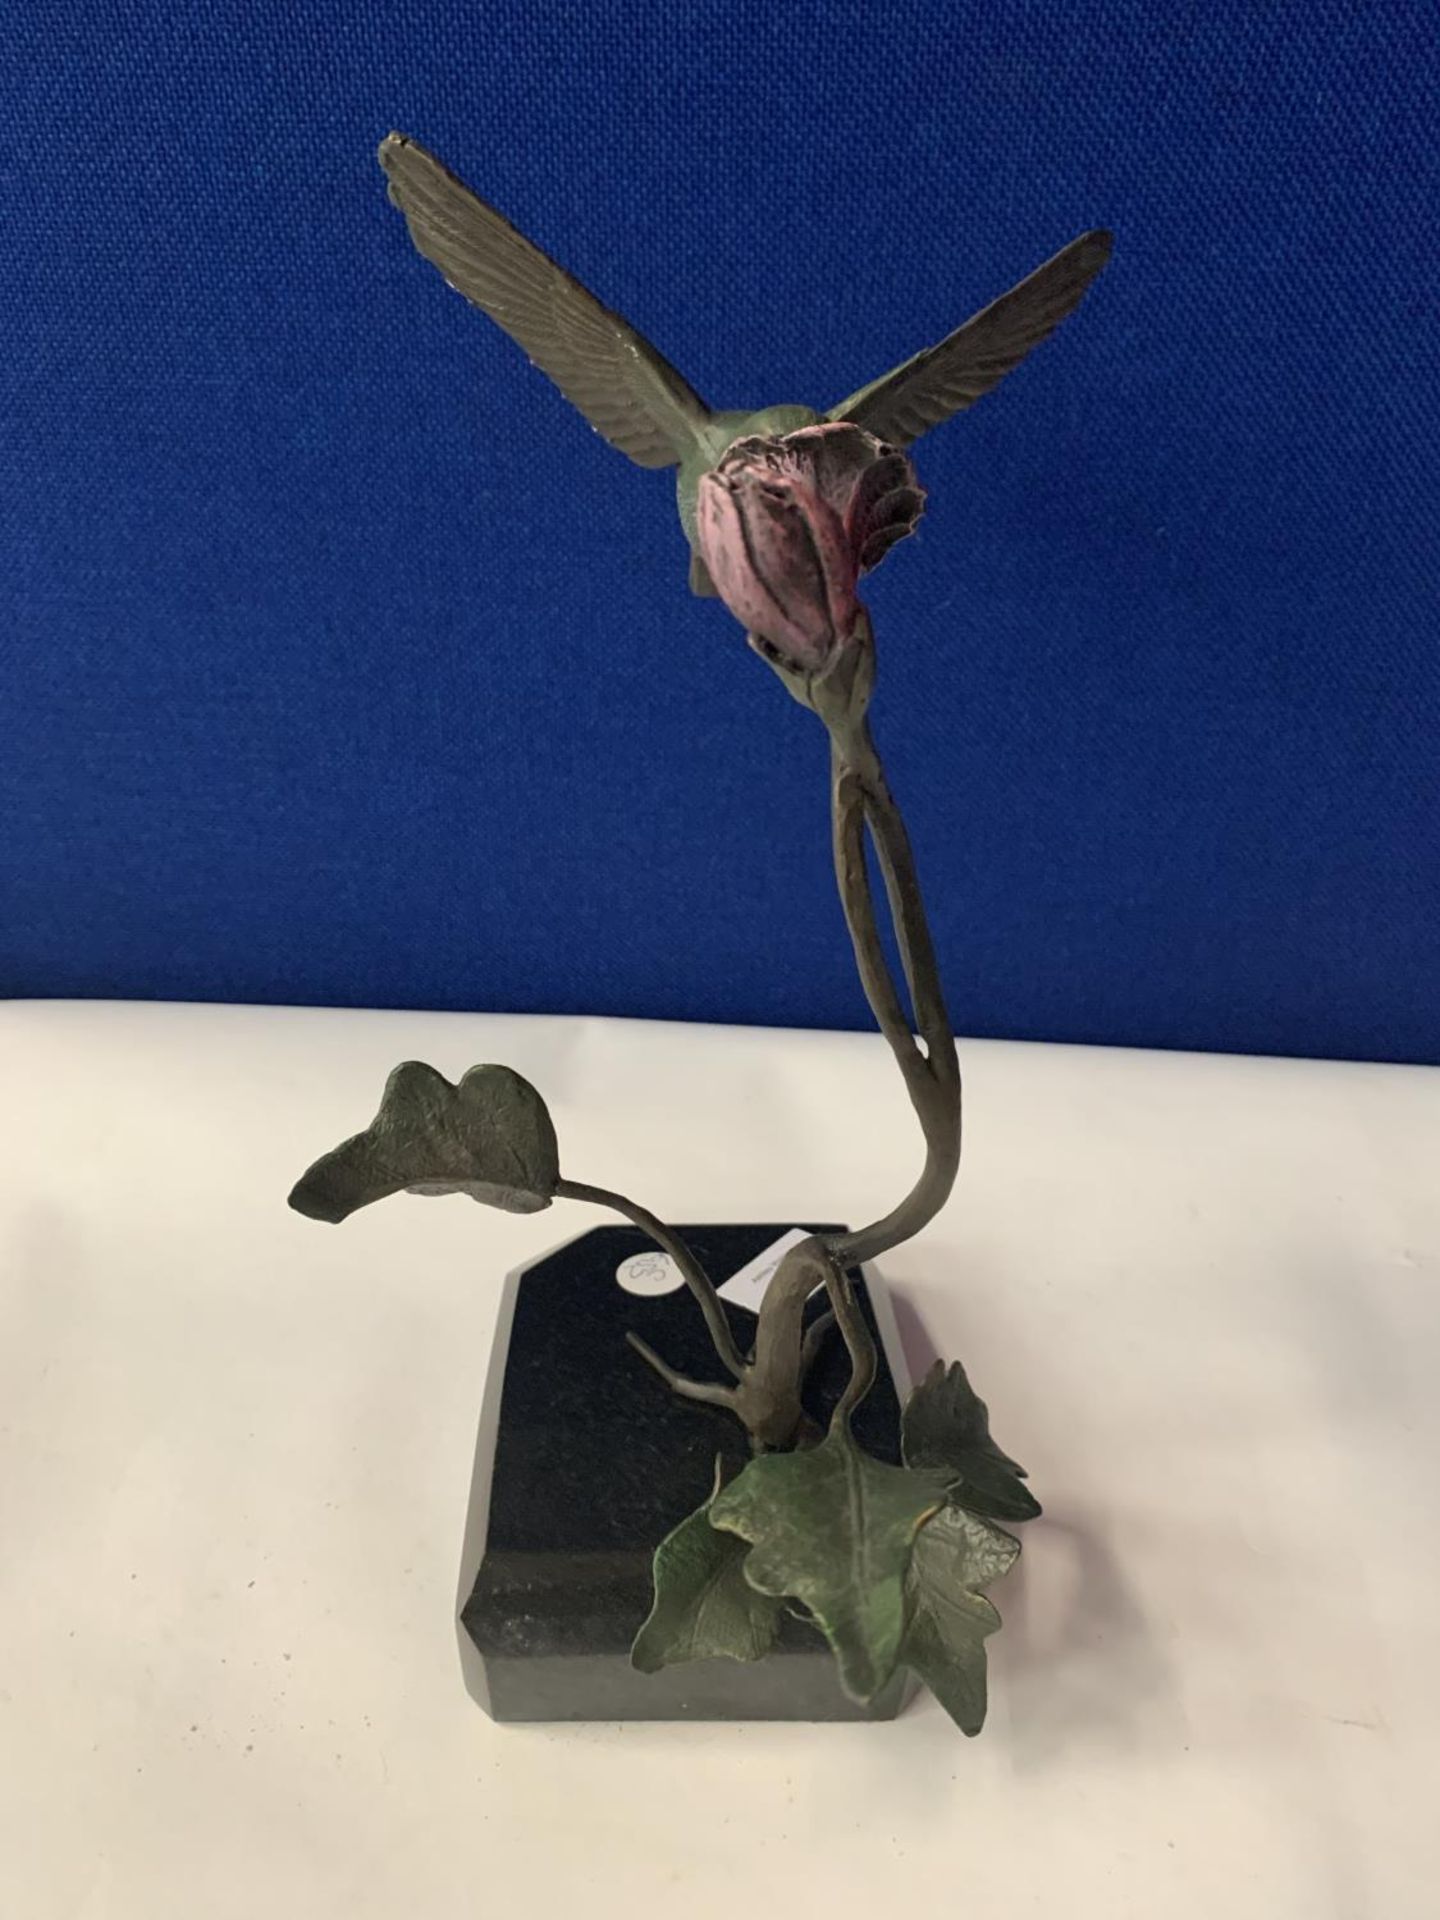 A CAST SCULPTURE OF A HUMMING BIRD ON A GRANITE BASE - Image 7 of 15